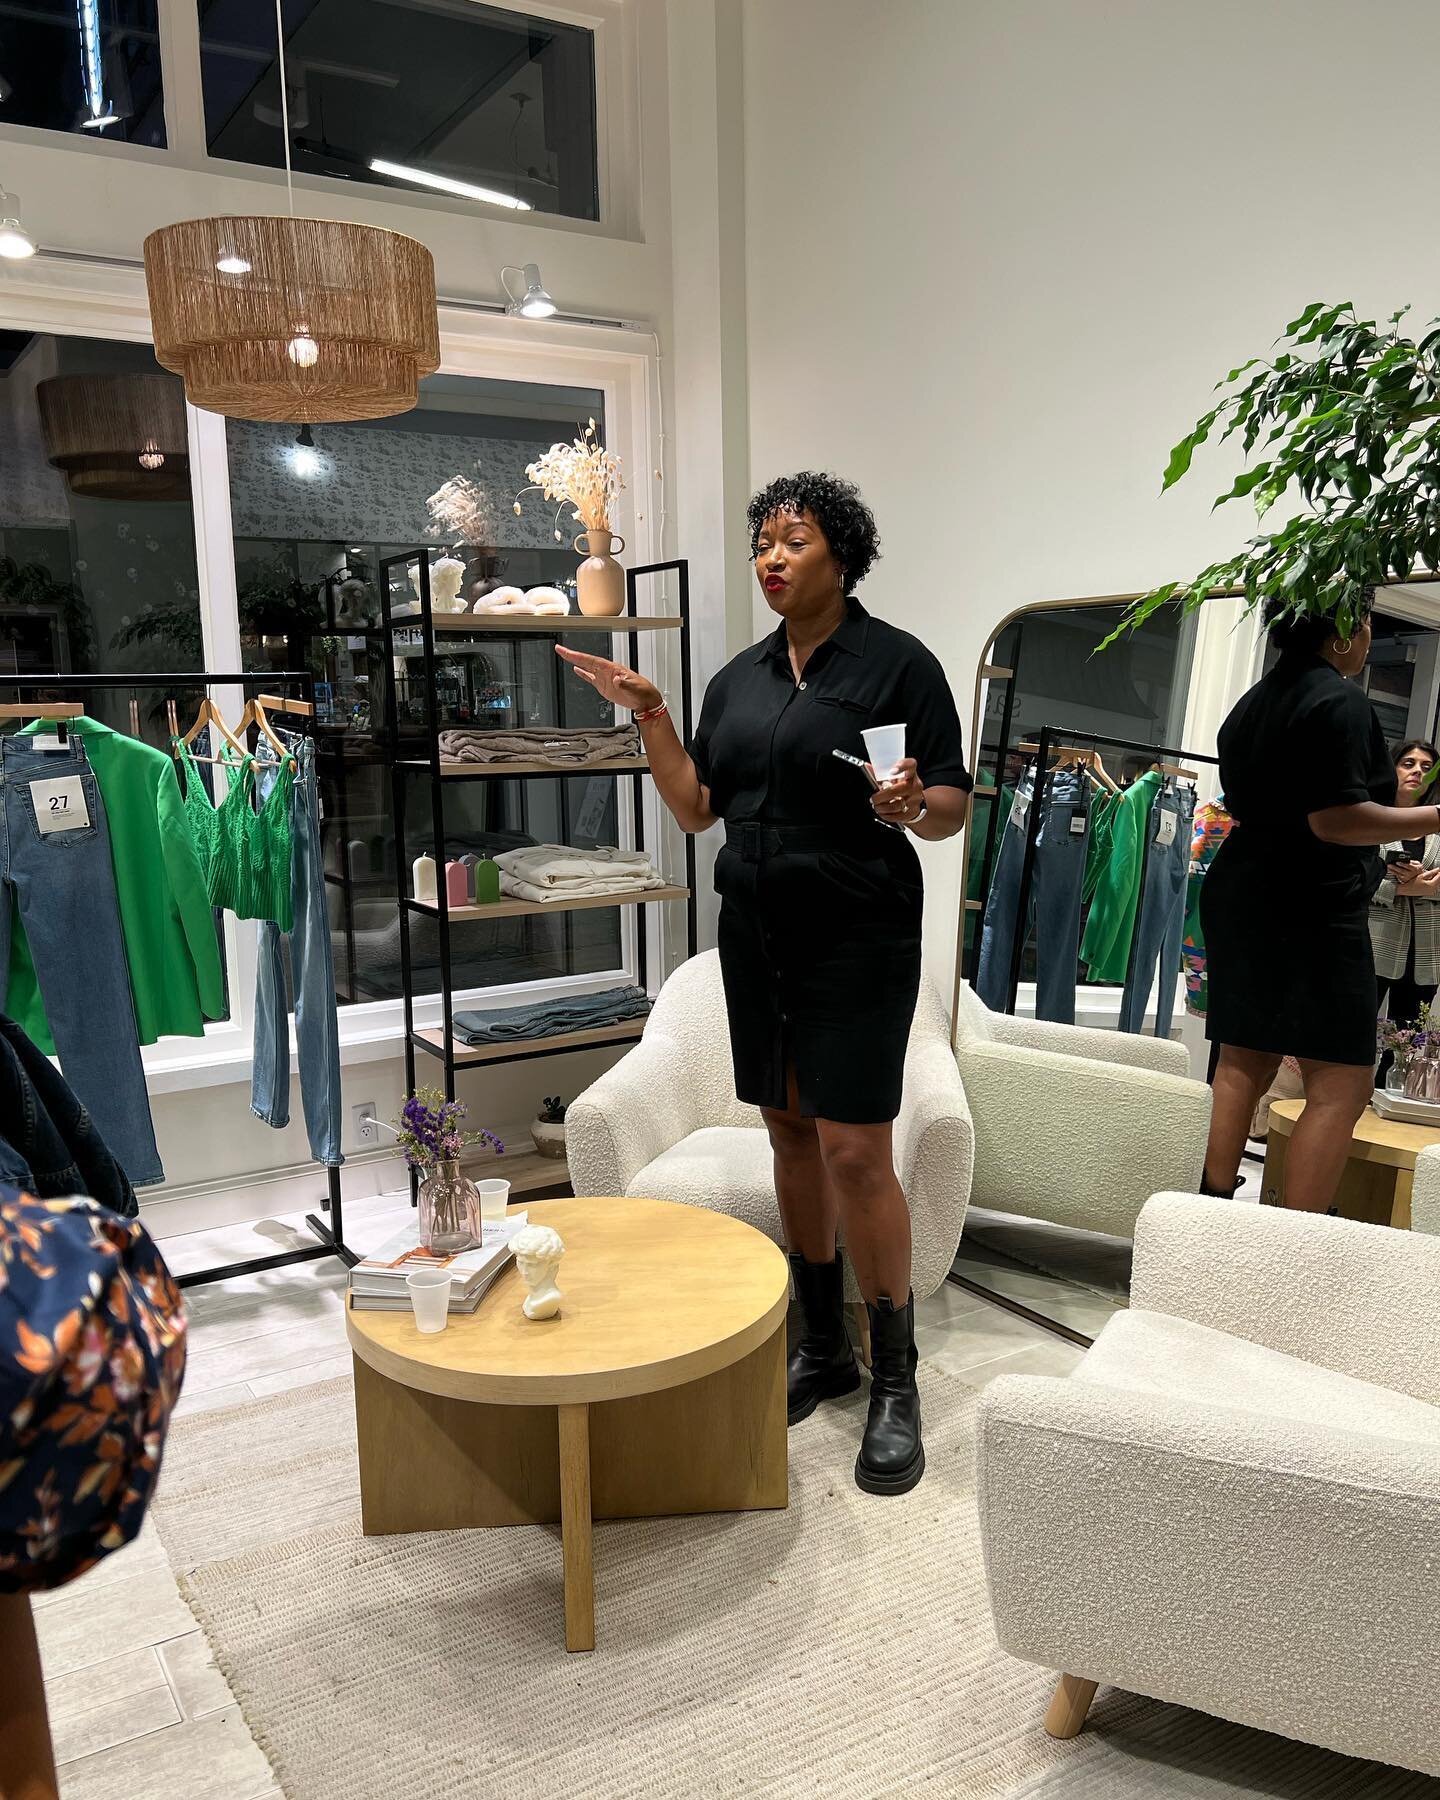 What a terrific evening w awesome women-run businesses to benefit @soles4souls. Thank you @rachelorganizes @naturally.london @itsworkingproj @wyliegrey. I&rsquo;ll partner with you anytime, anywhere. Missed last night? You can drop off shoes @wyliegr